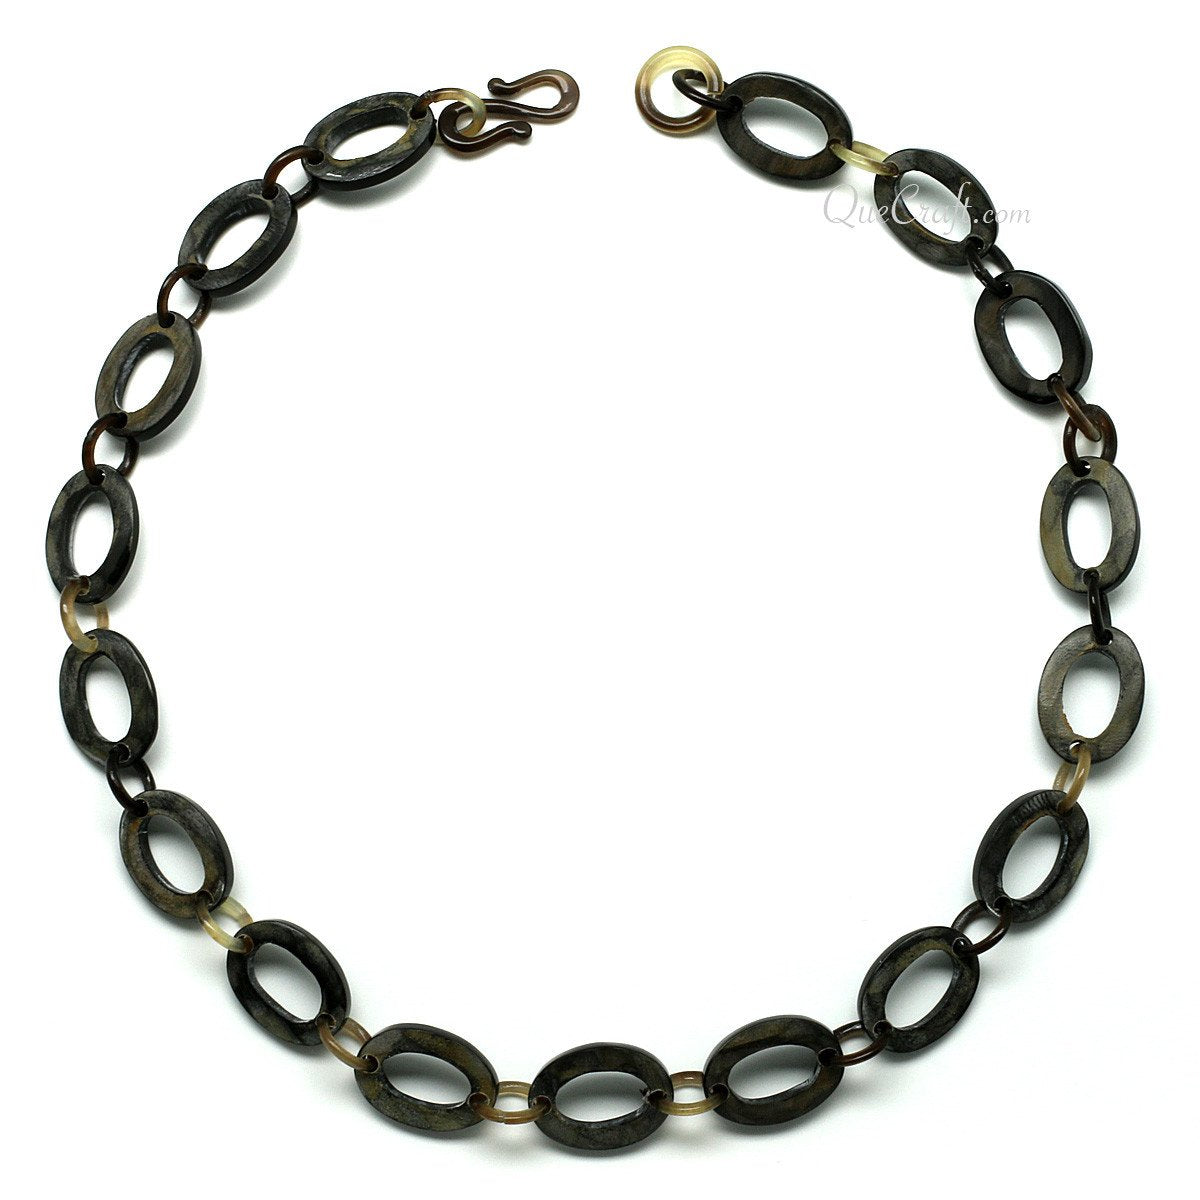 Horn Chain Necklace #11535 - HORN JEWELRY